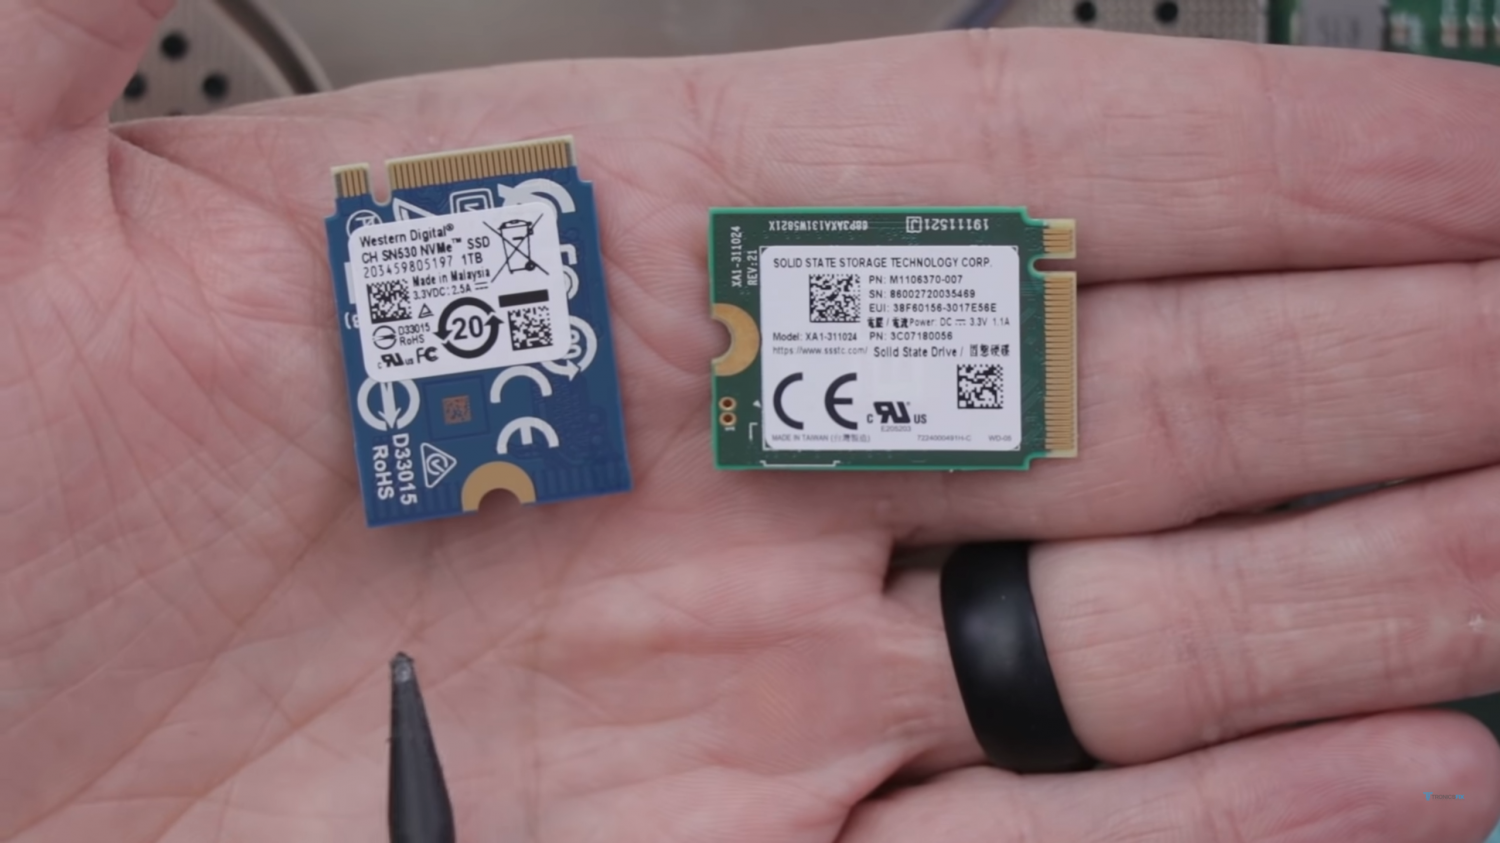 Cloned Xbox Series X internal SSDs can work on other Series X consoles